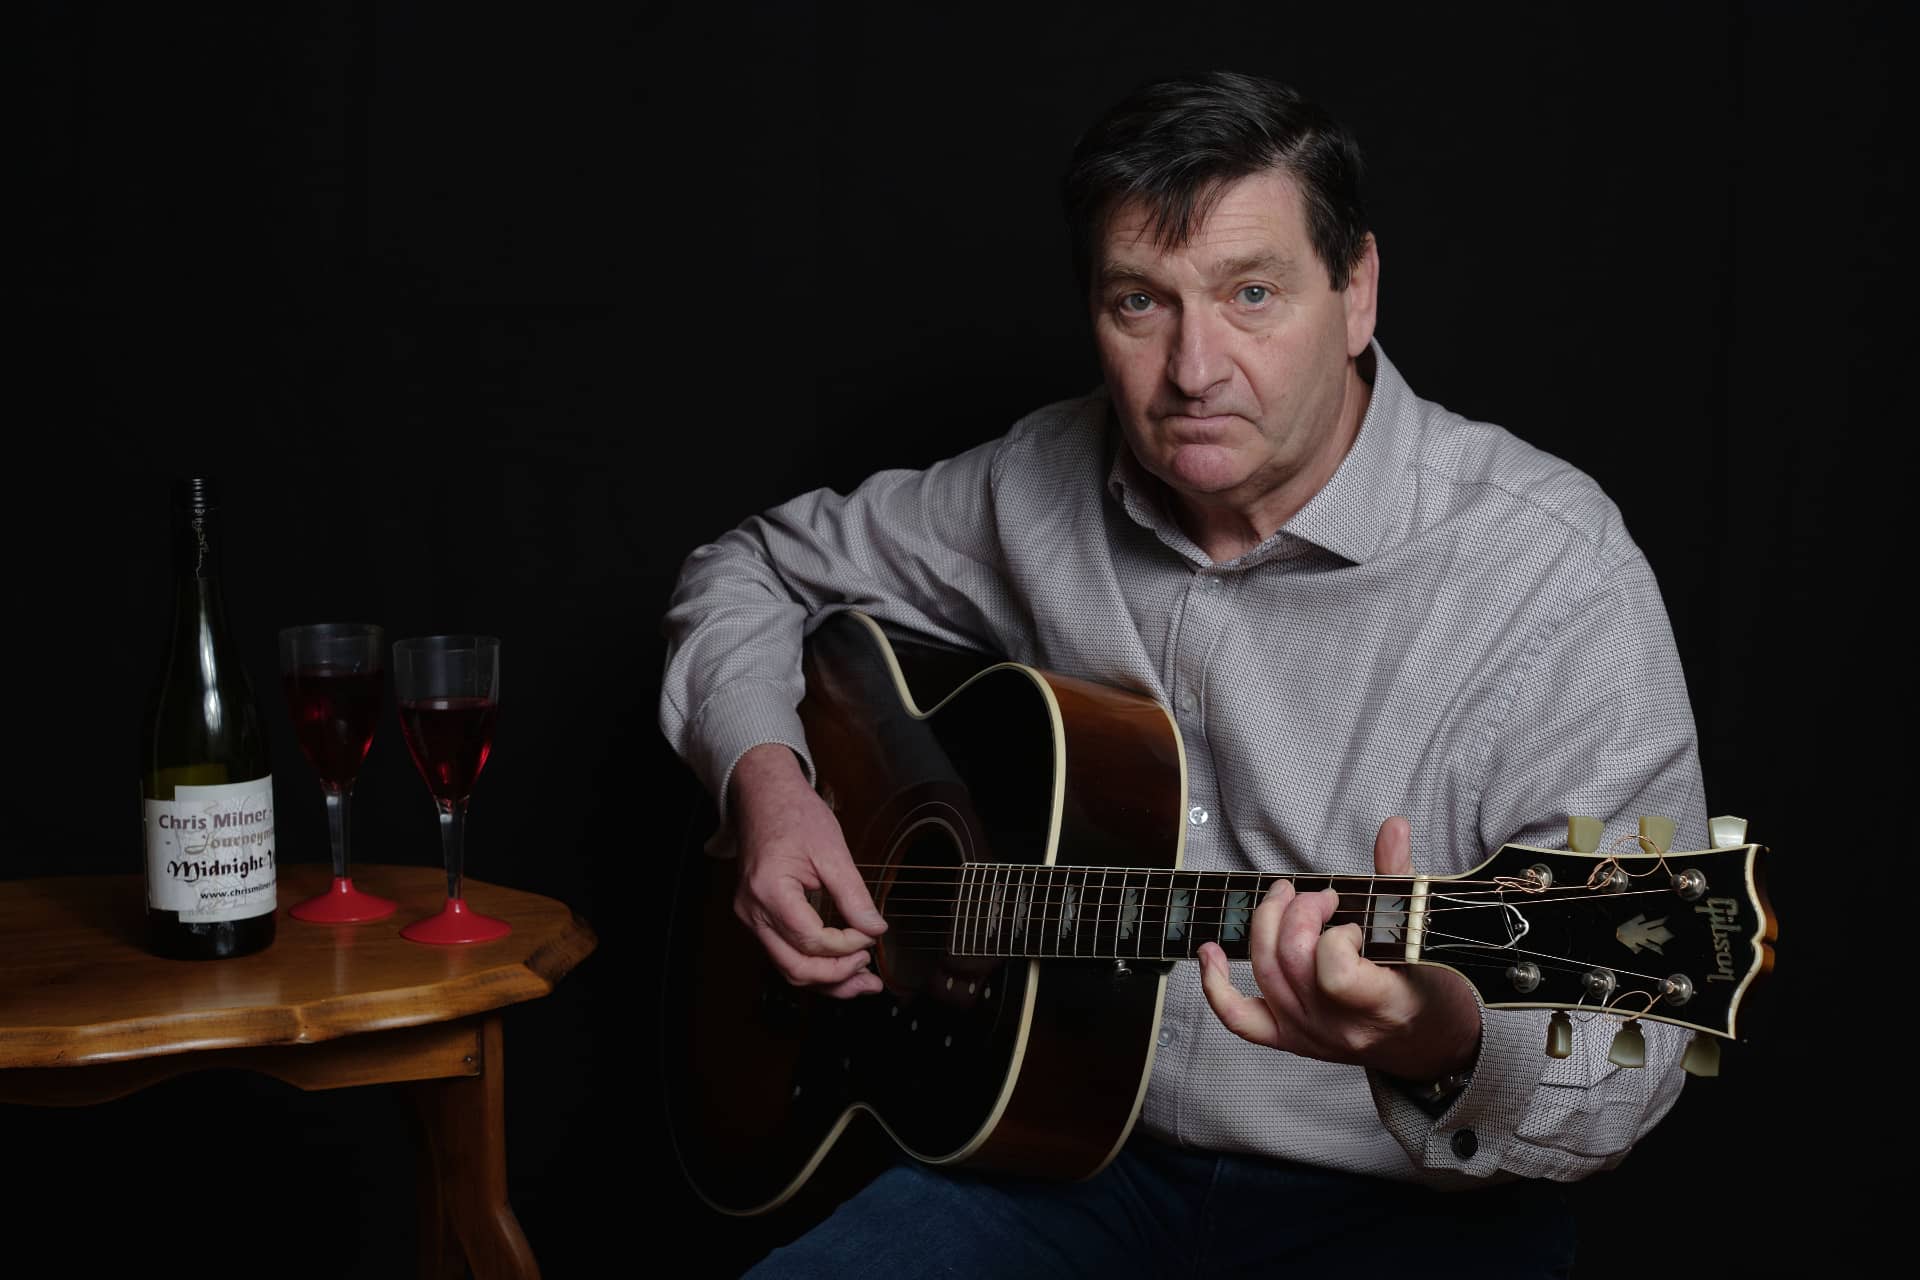 Chris Milner with guitar and bottle of wine with two glasses on table